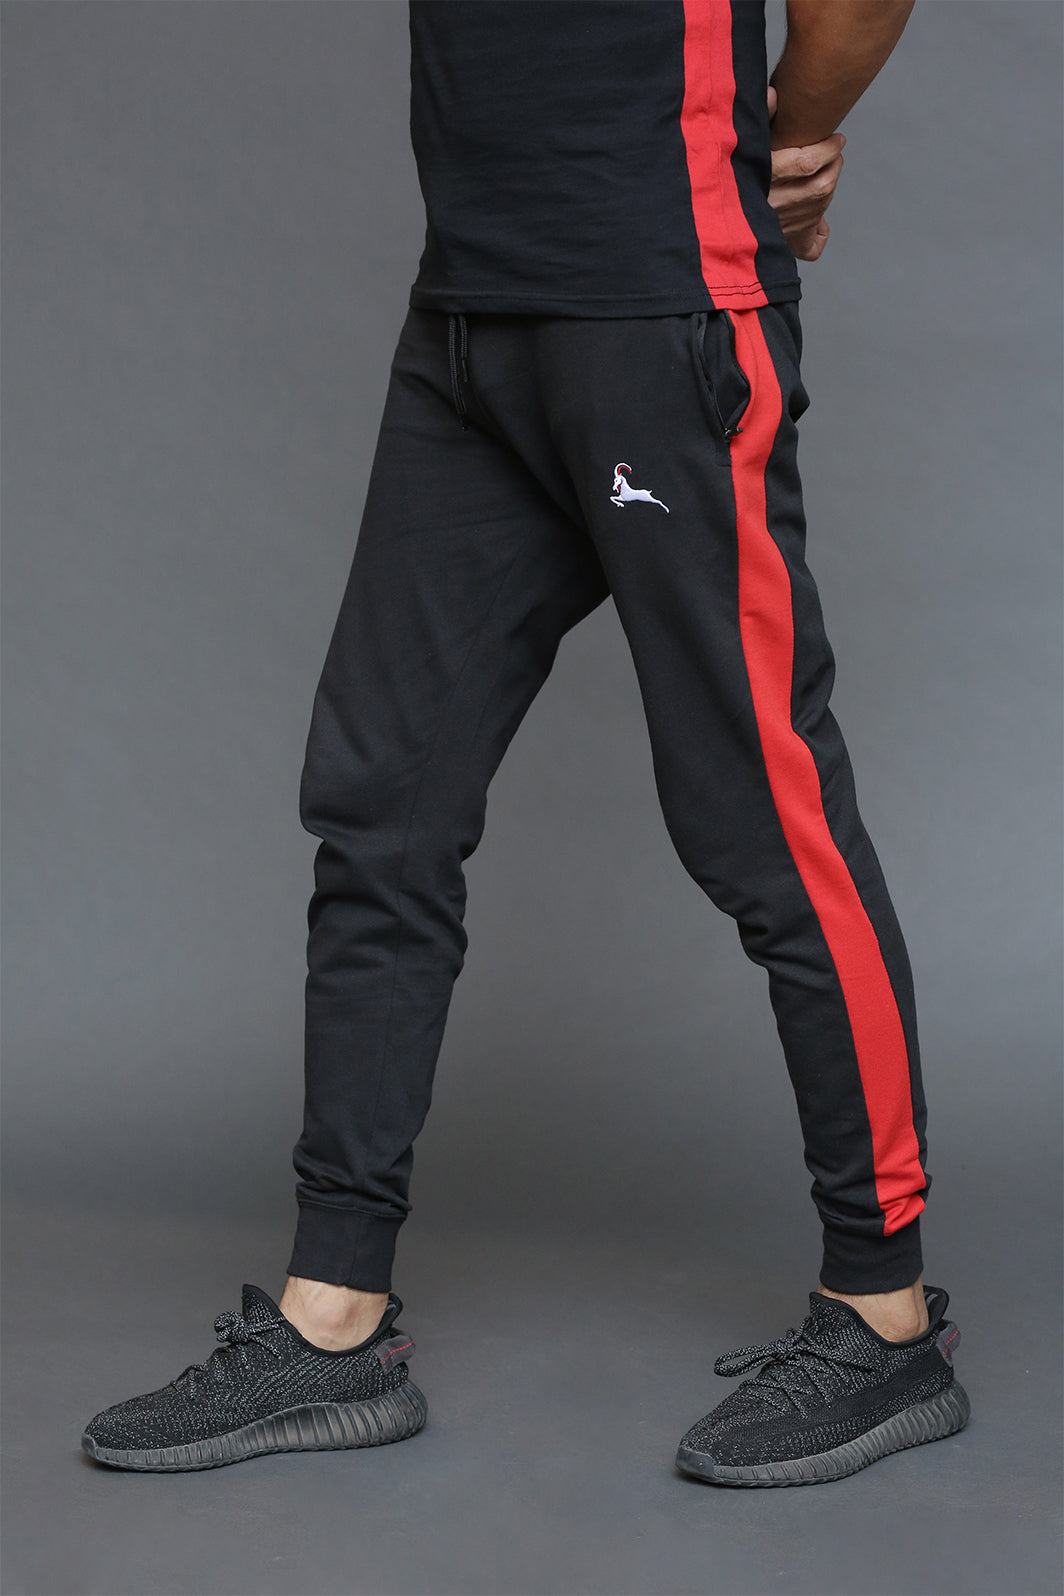 Buy online Lv Red Black Joggers In Pakistan, Rs 4800, Best Price